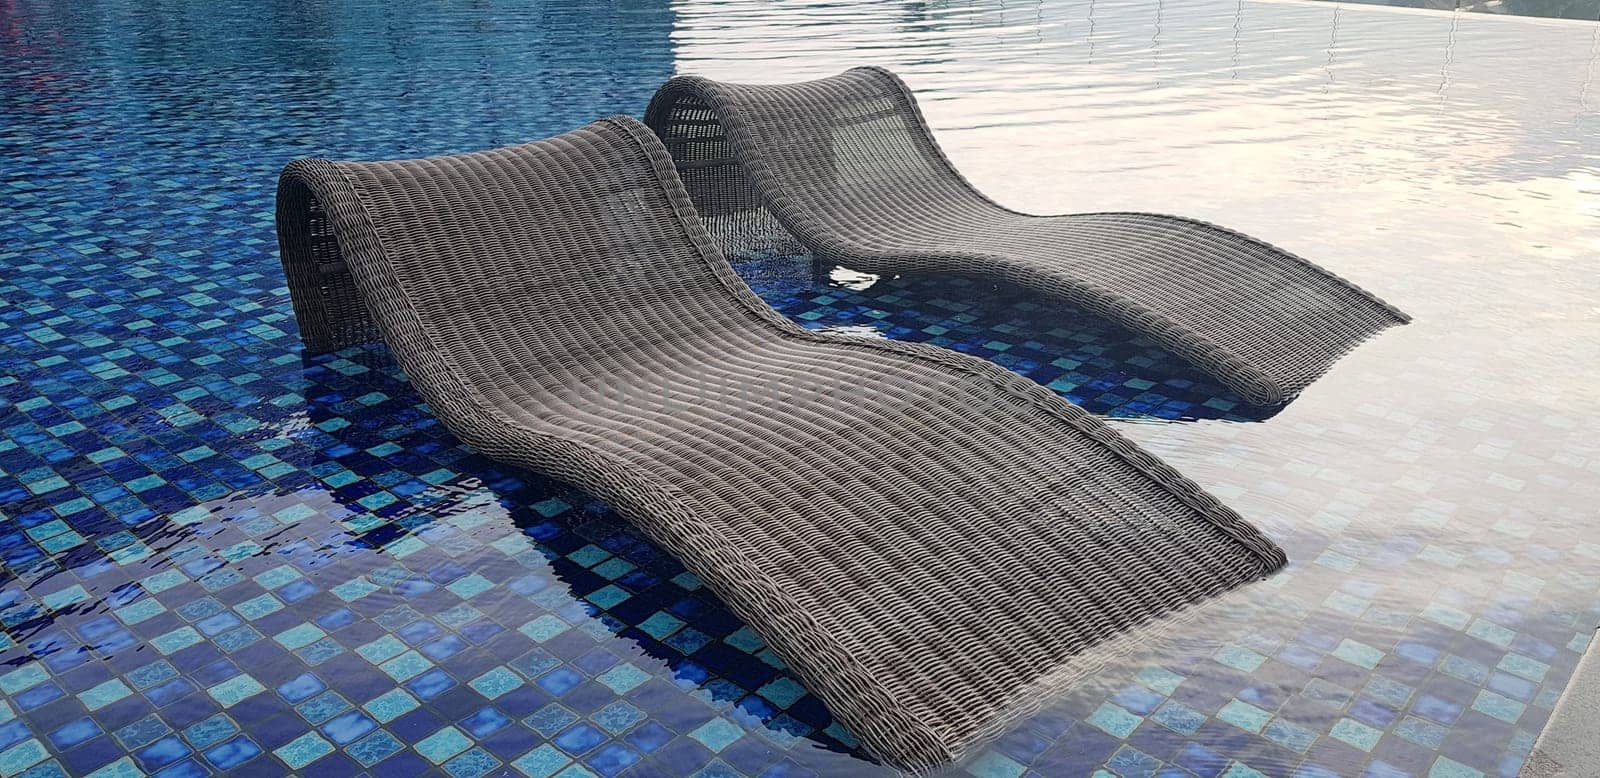 relax deck chair by the blue pool at swimming pool in luxury spa resort or villa Tourism industry crisis after covid 19 coronavirus pandemic Travel lifestyle on family summer vacation